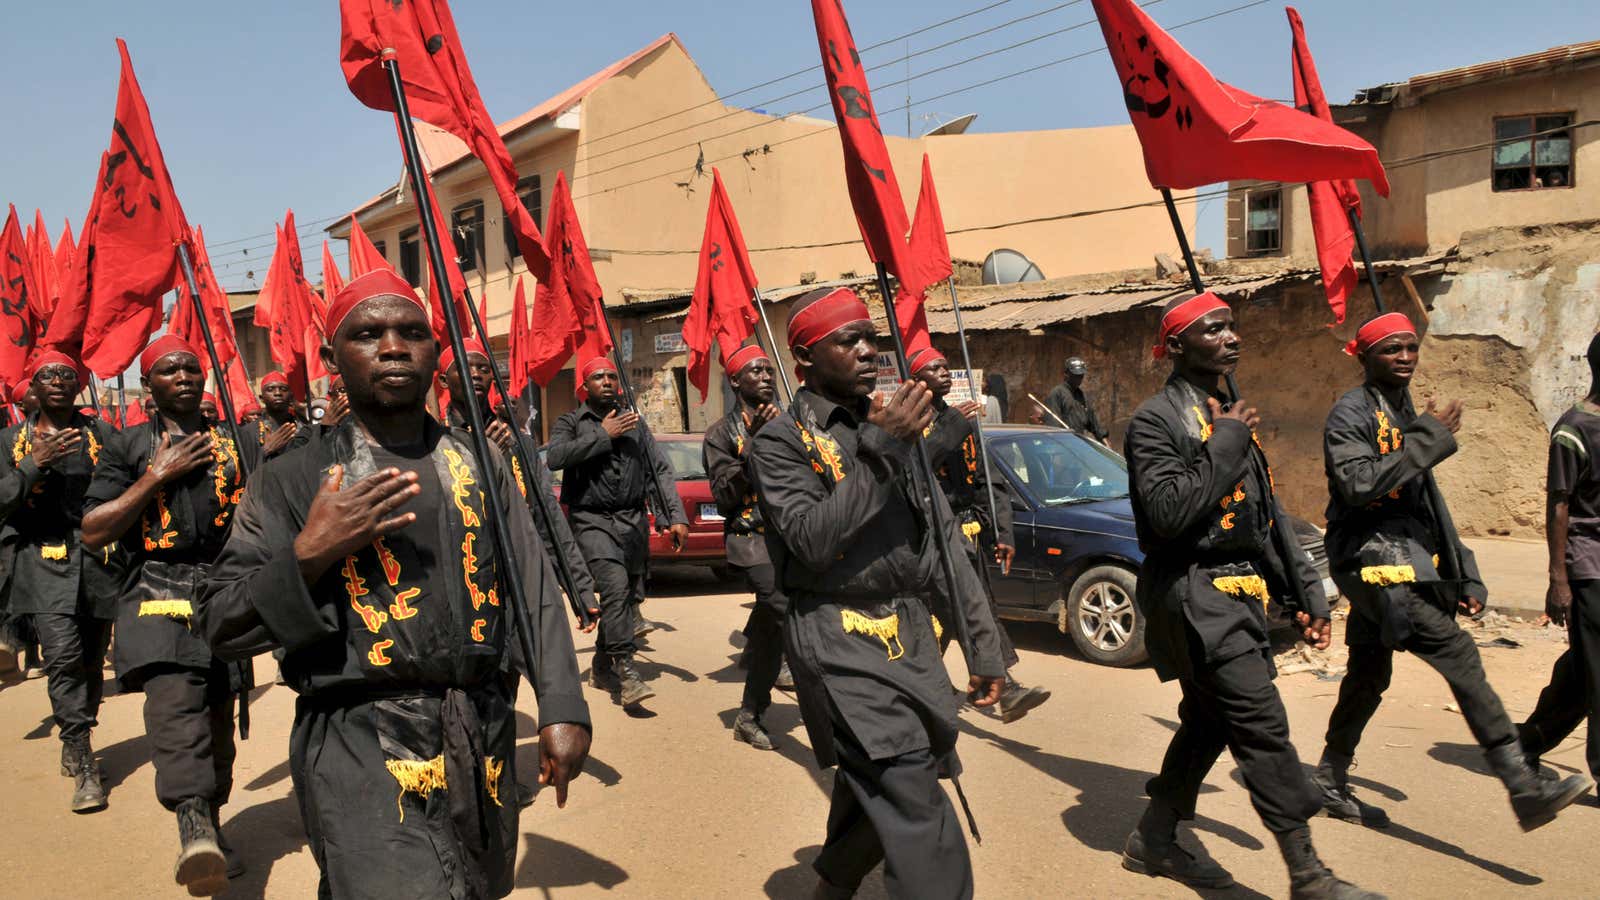 Shi’ite Muslims take part in an Islamic rally in October in Kano, northern Nigeria/